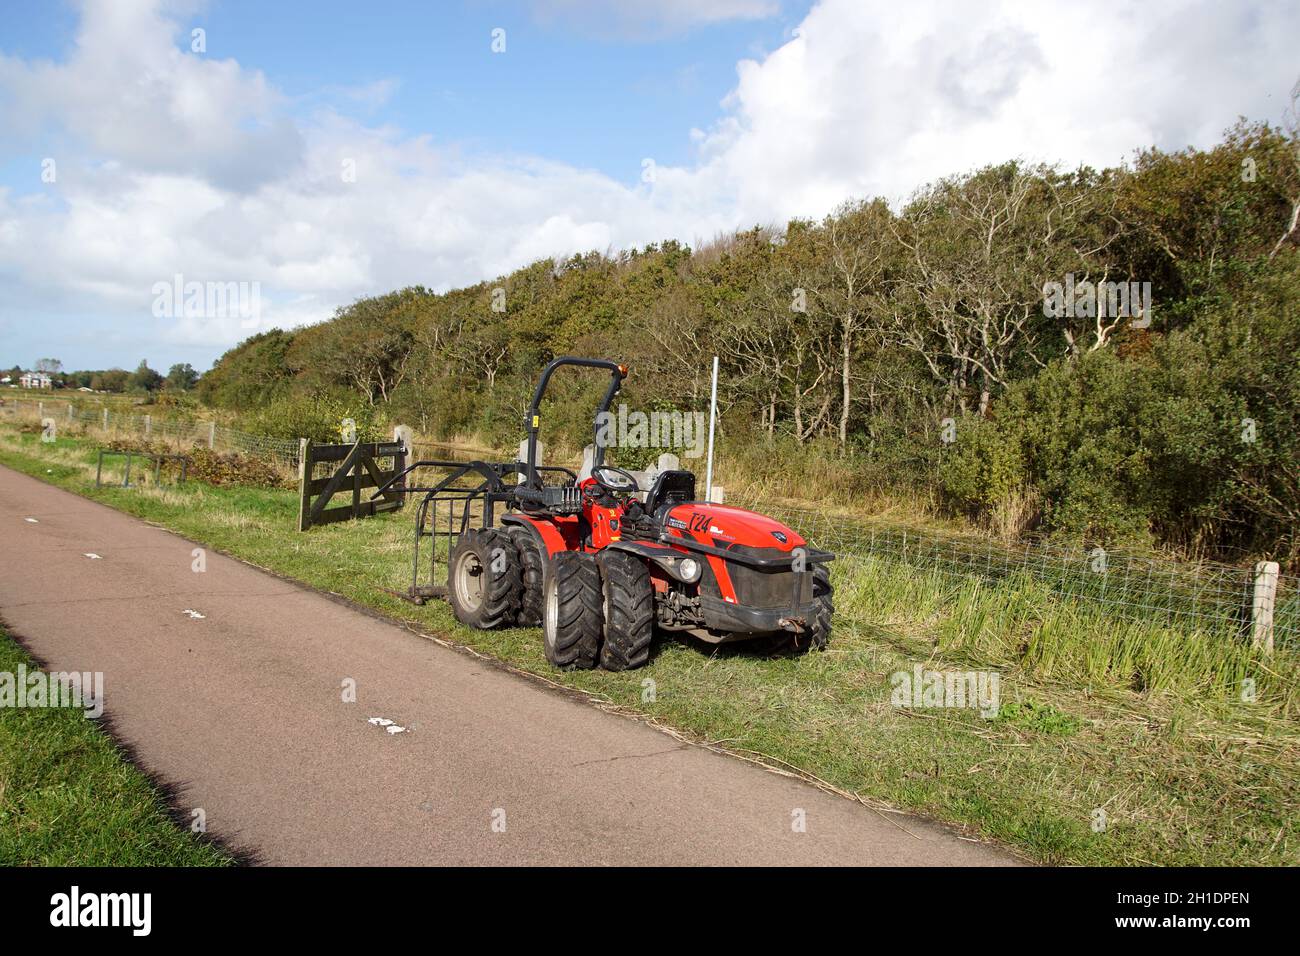 Tractor Antonio carraro TTR 4400. Dual tires for wet nature reserve. Water, reeds, forest, bike path, Near the Dutch village of Bergen in autumn Stock Photo